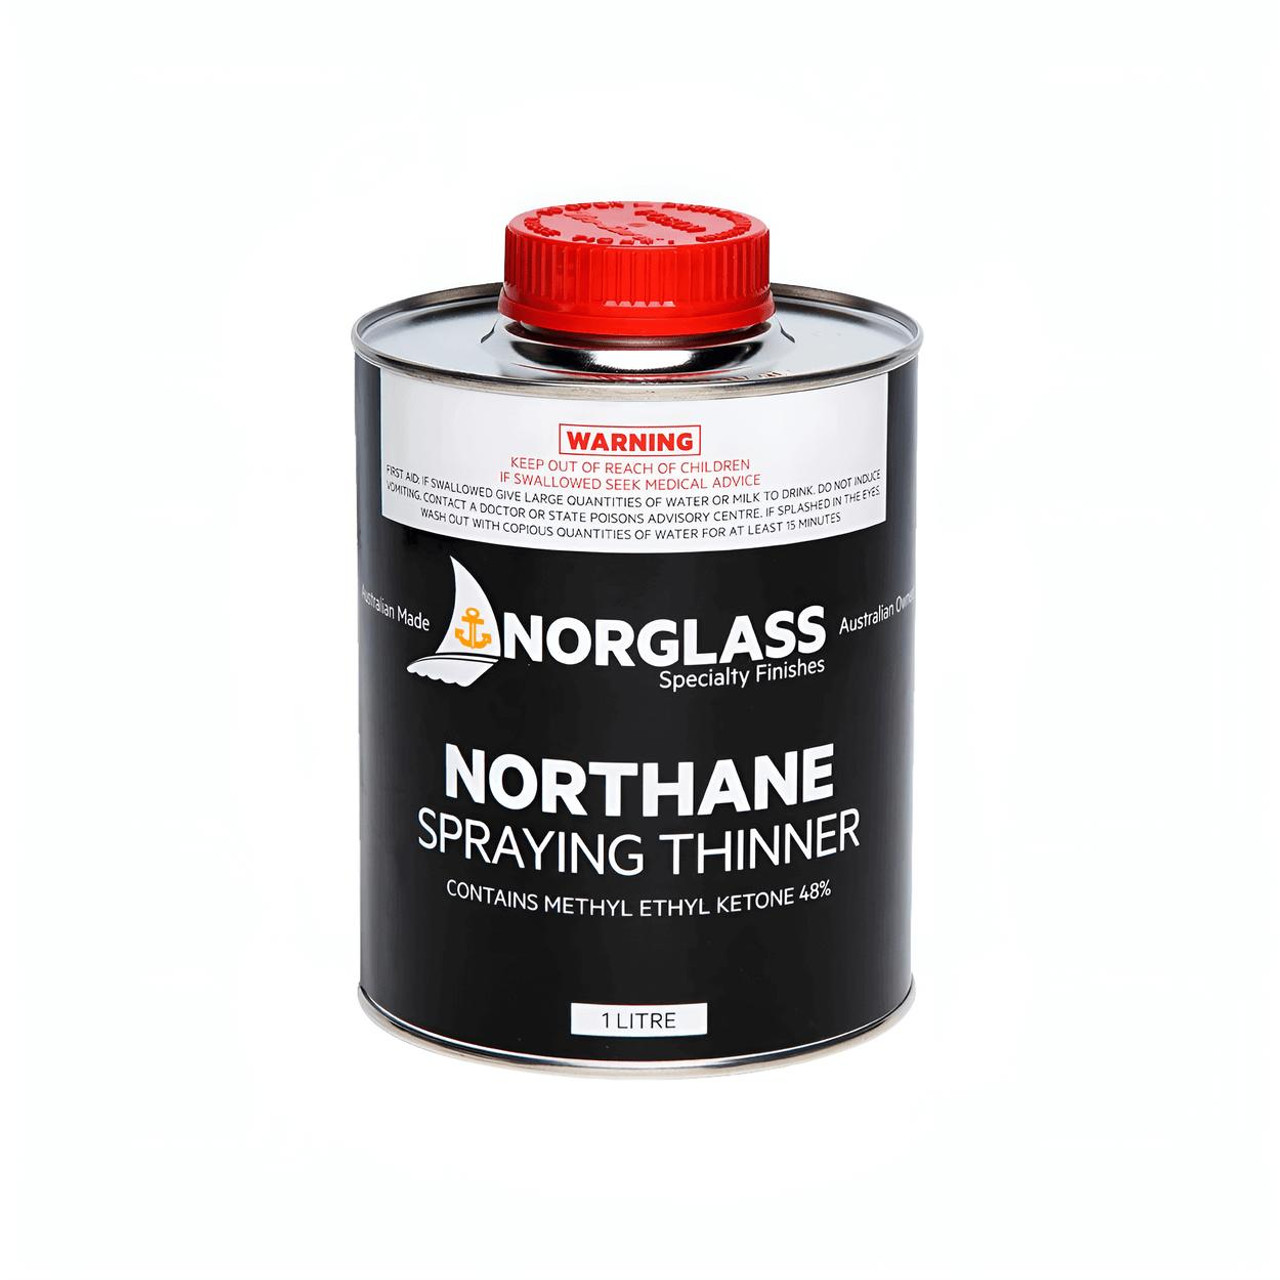  Norglass Northane Spraying Thinners (1L) 